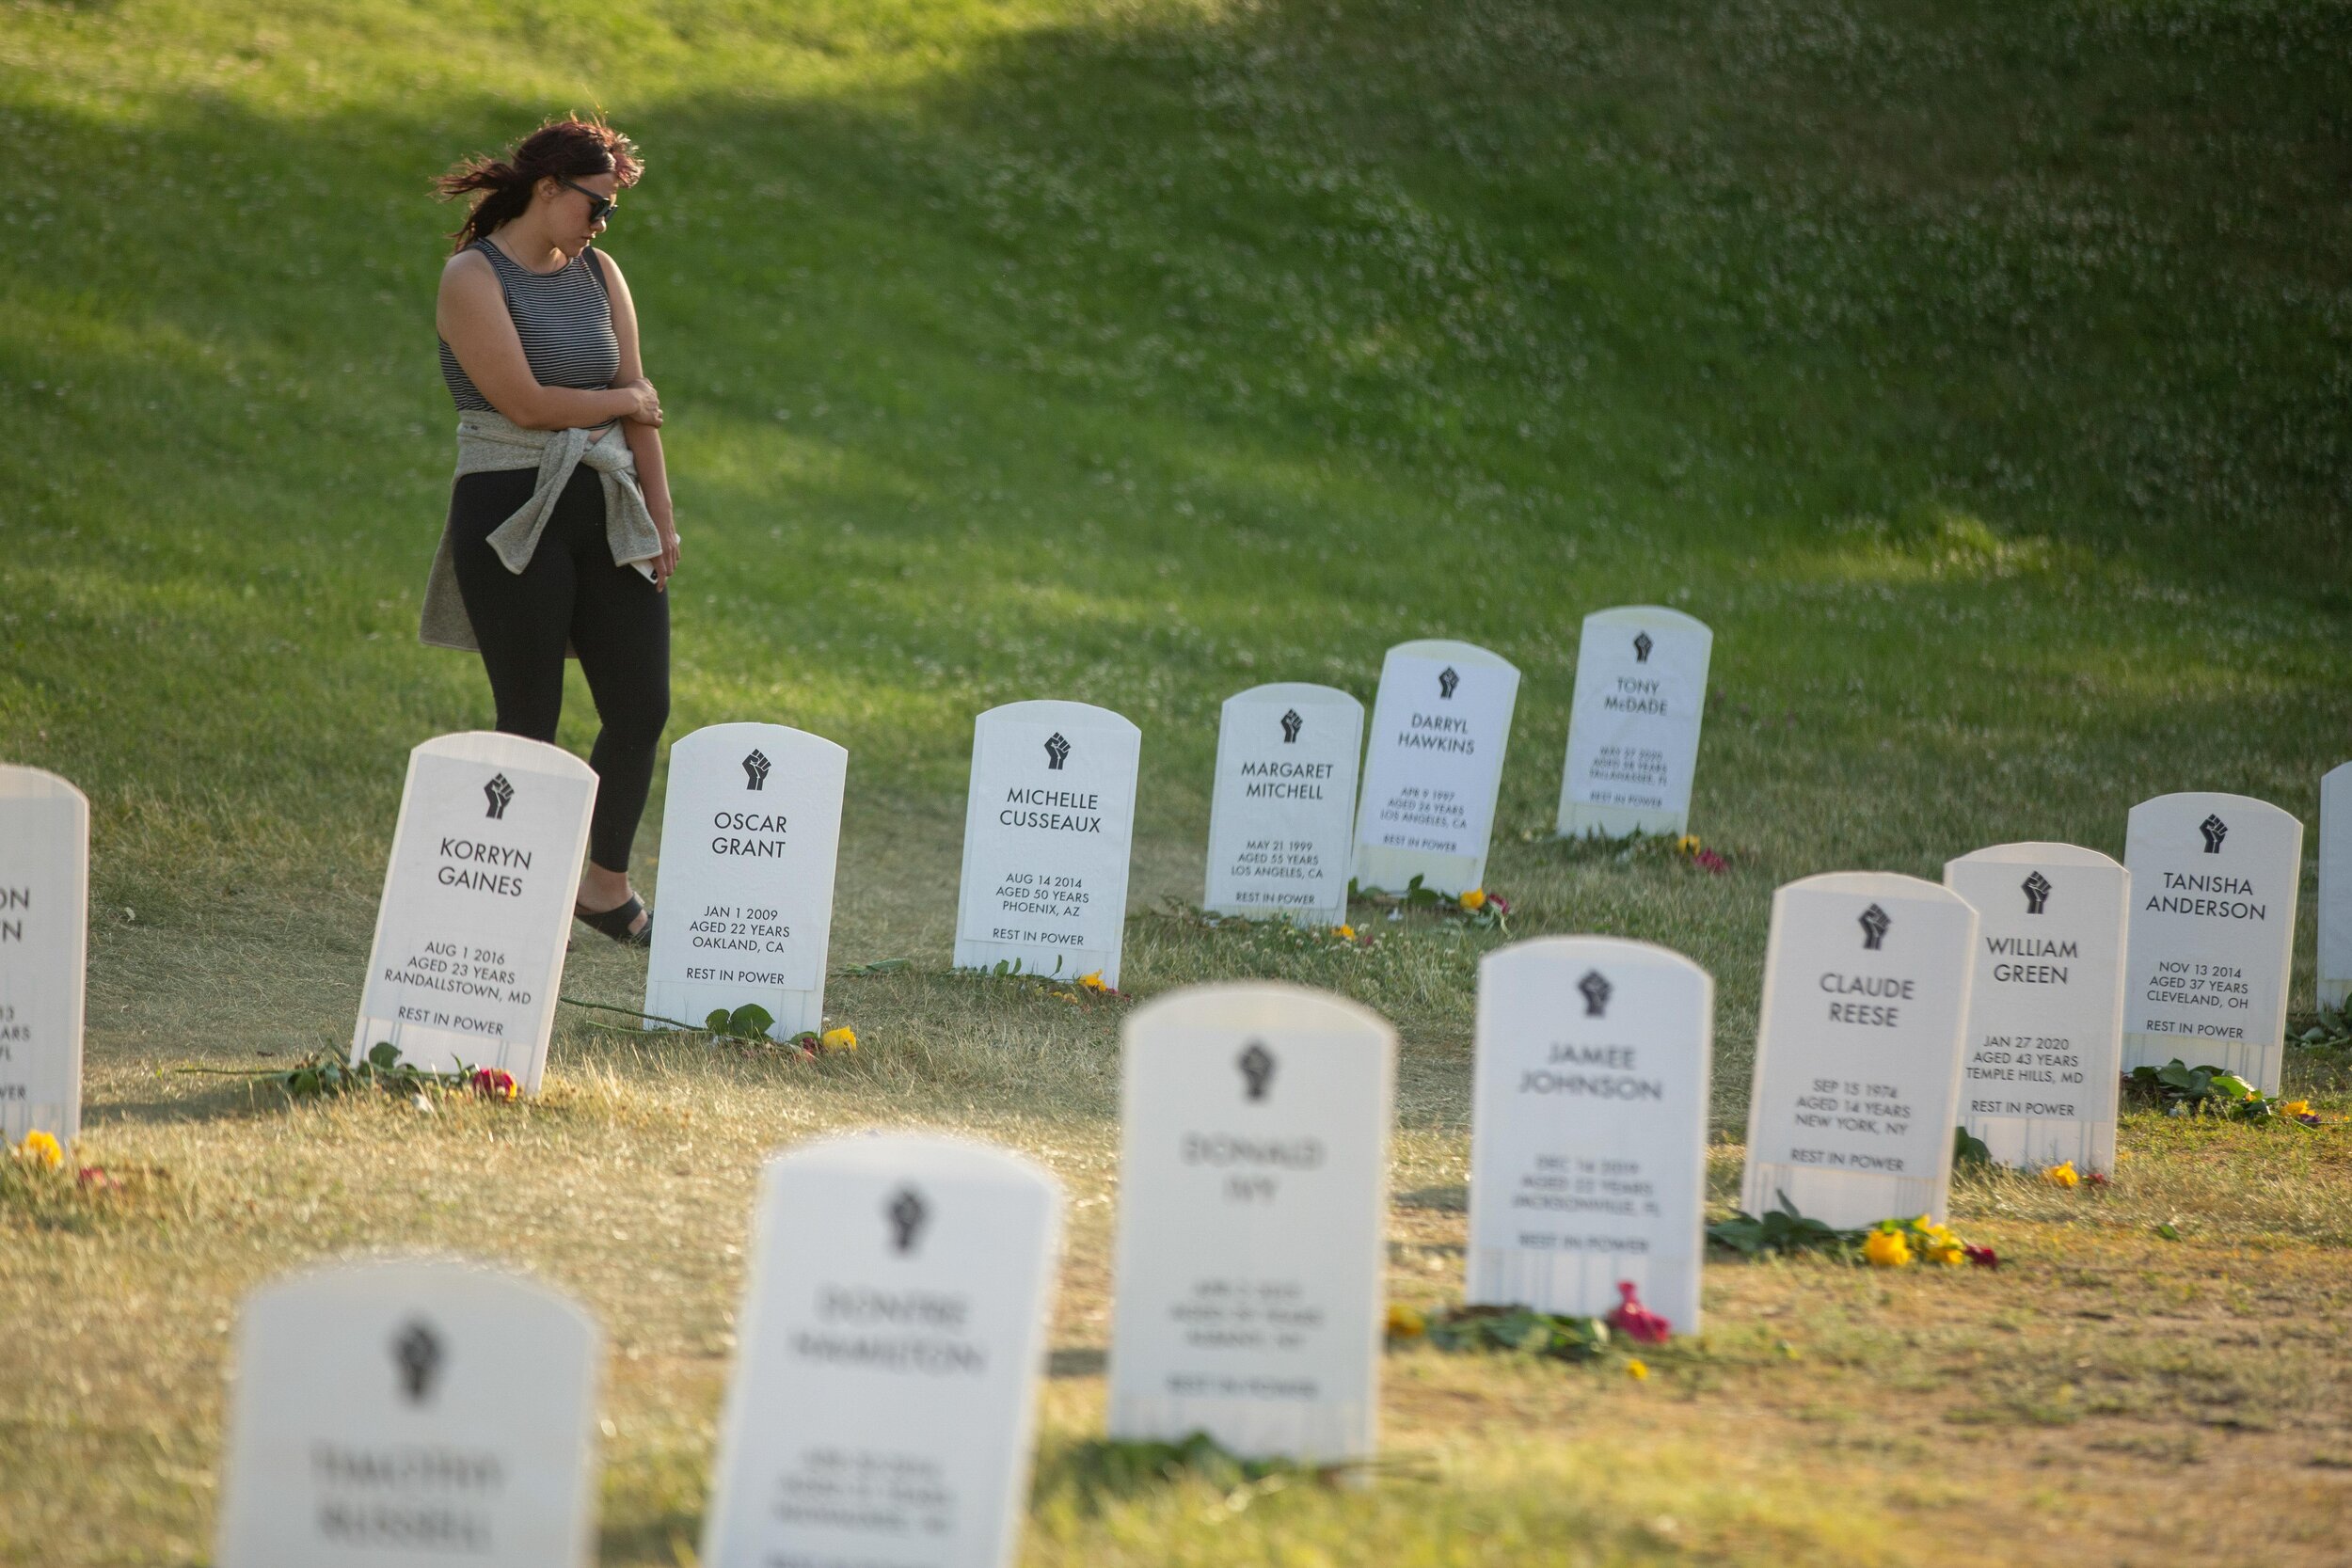  Walking around amock grave site of victims from around the country of police violence, a women stops and stares at a name in Minneapolis, Minnesota on Jun 14. 